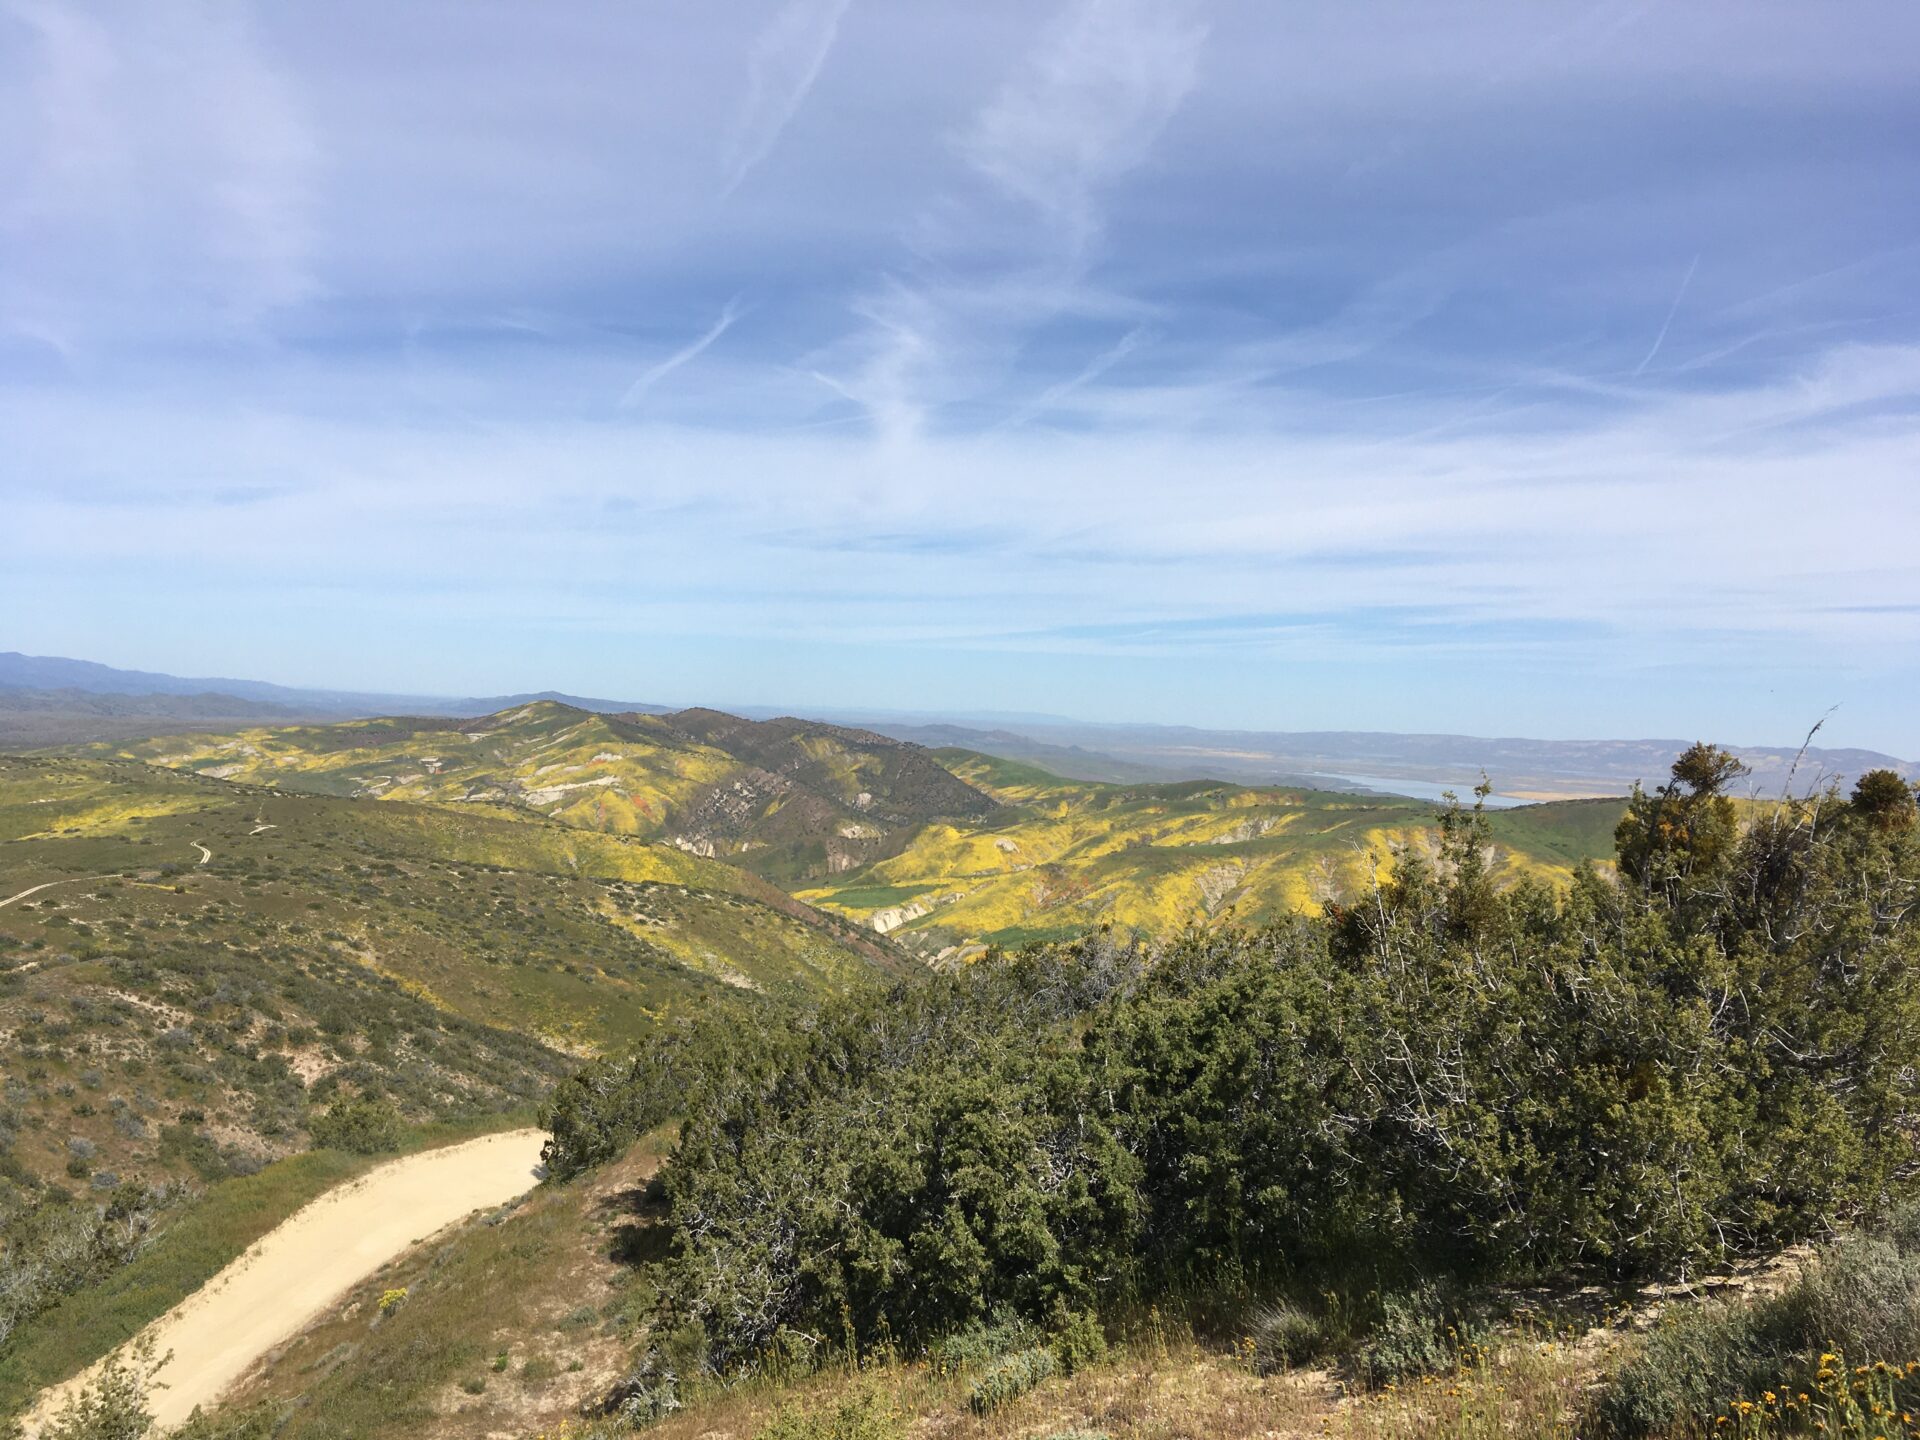 Rolling hills covered in greenery and patches of yellow wildflowers in Carrizo Plains with a clear blue sky.